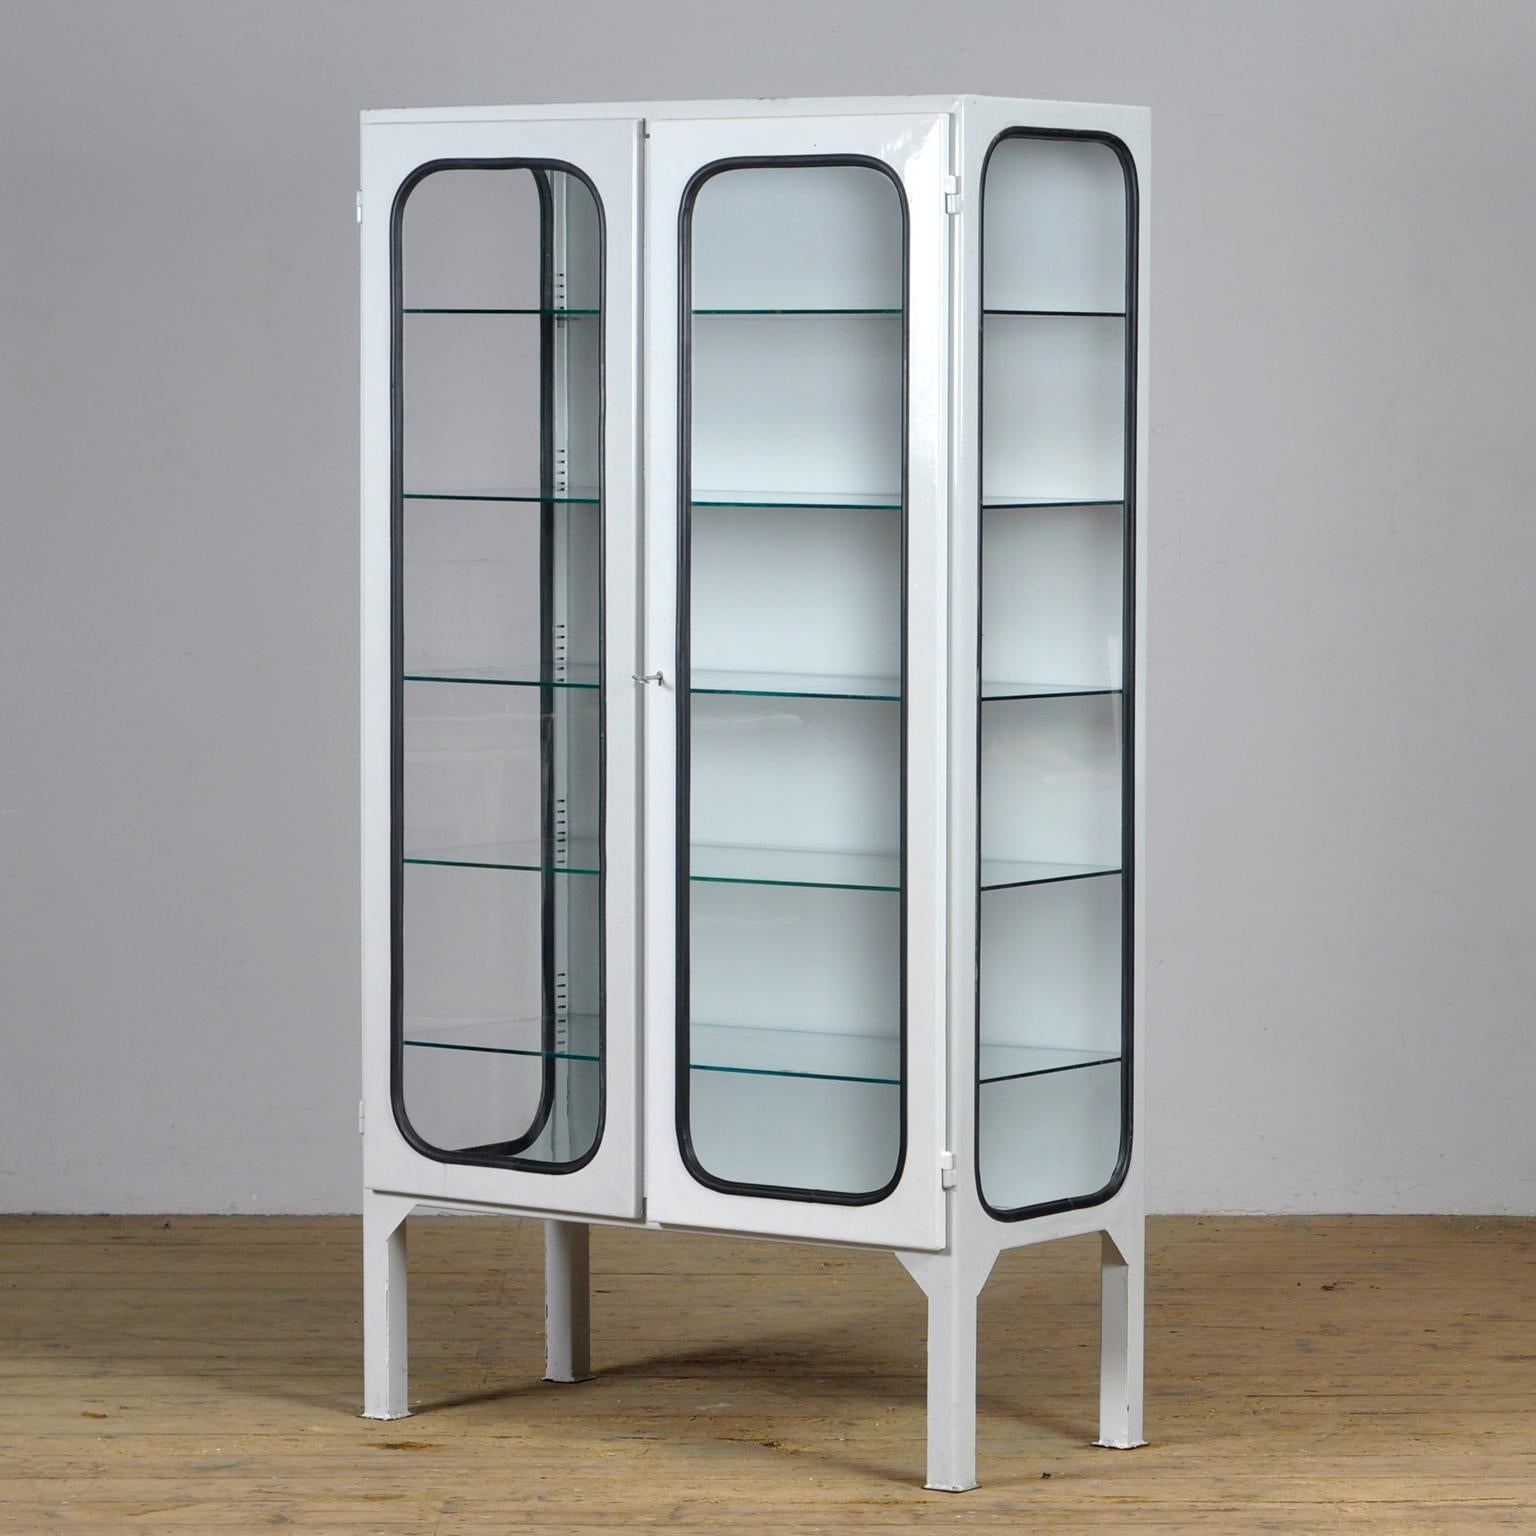 Hungarian Vintage Iron And Glass Medical Cabinet, 1970s For Sale